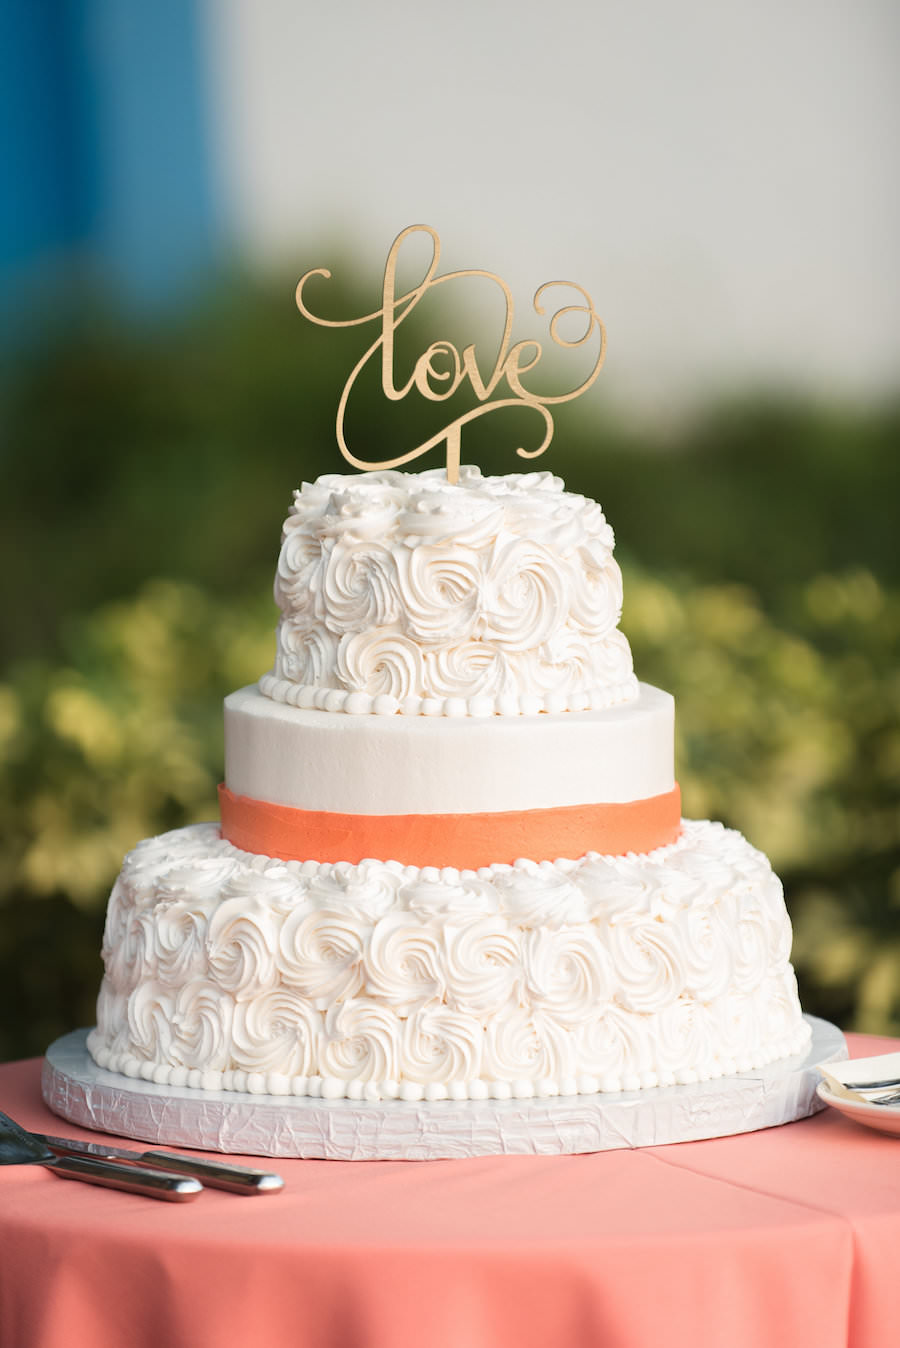 Three Tiered, White, Round Wedding Cake with Peach Accent and Rosette Icing and Gold Love Cake Topper | St. Petersburg Wedding Photographers Caroline and Evan Photography